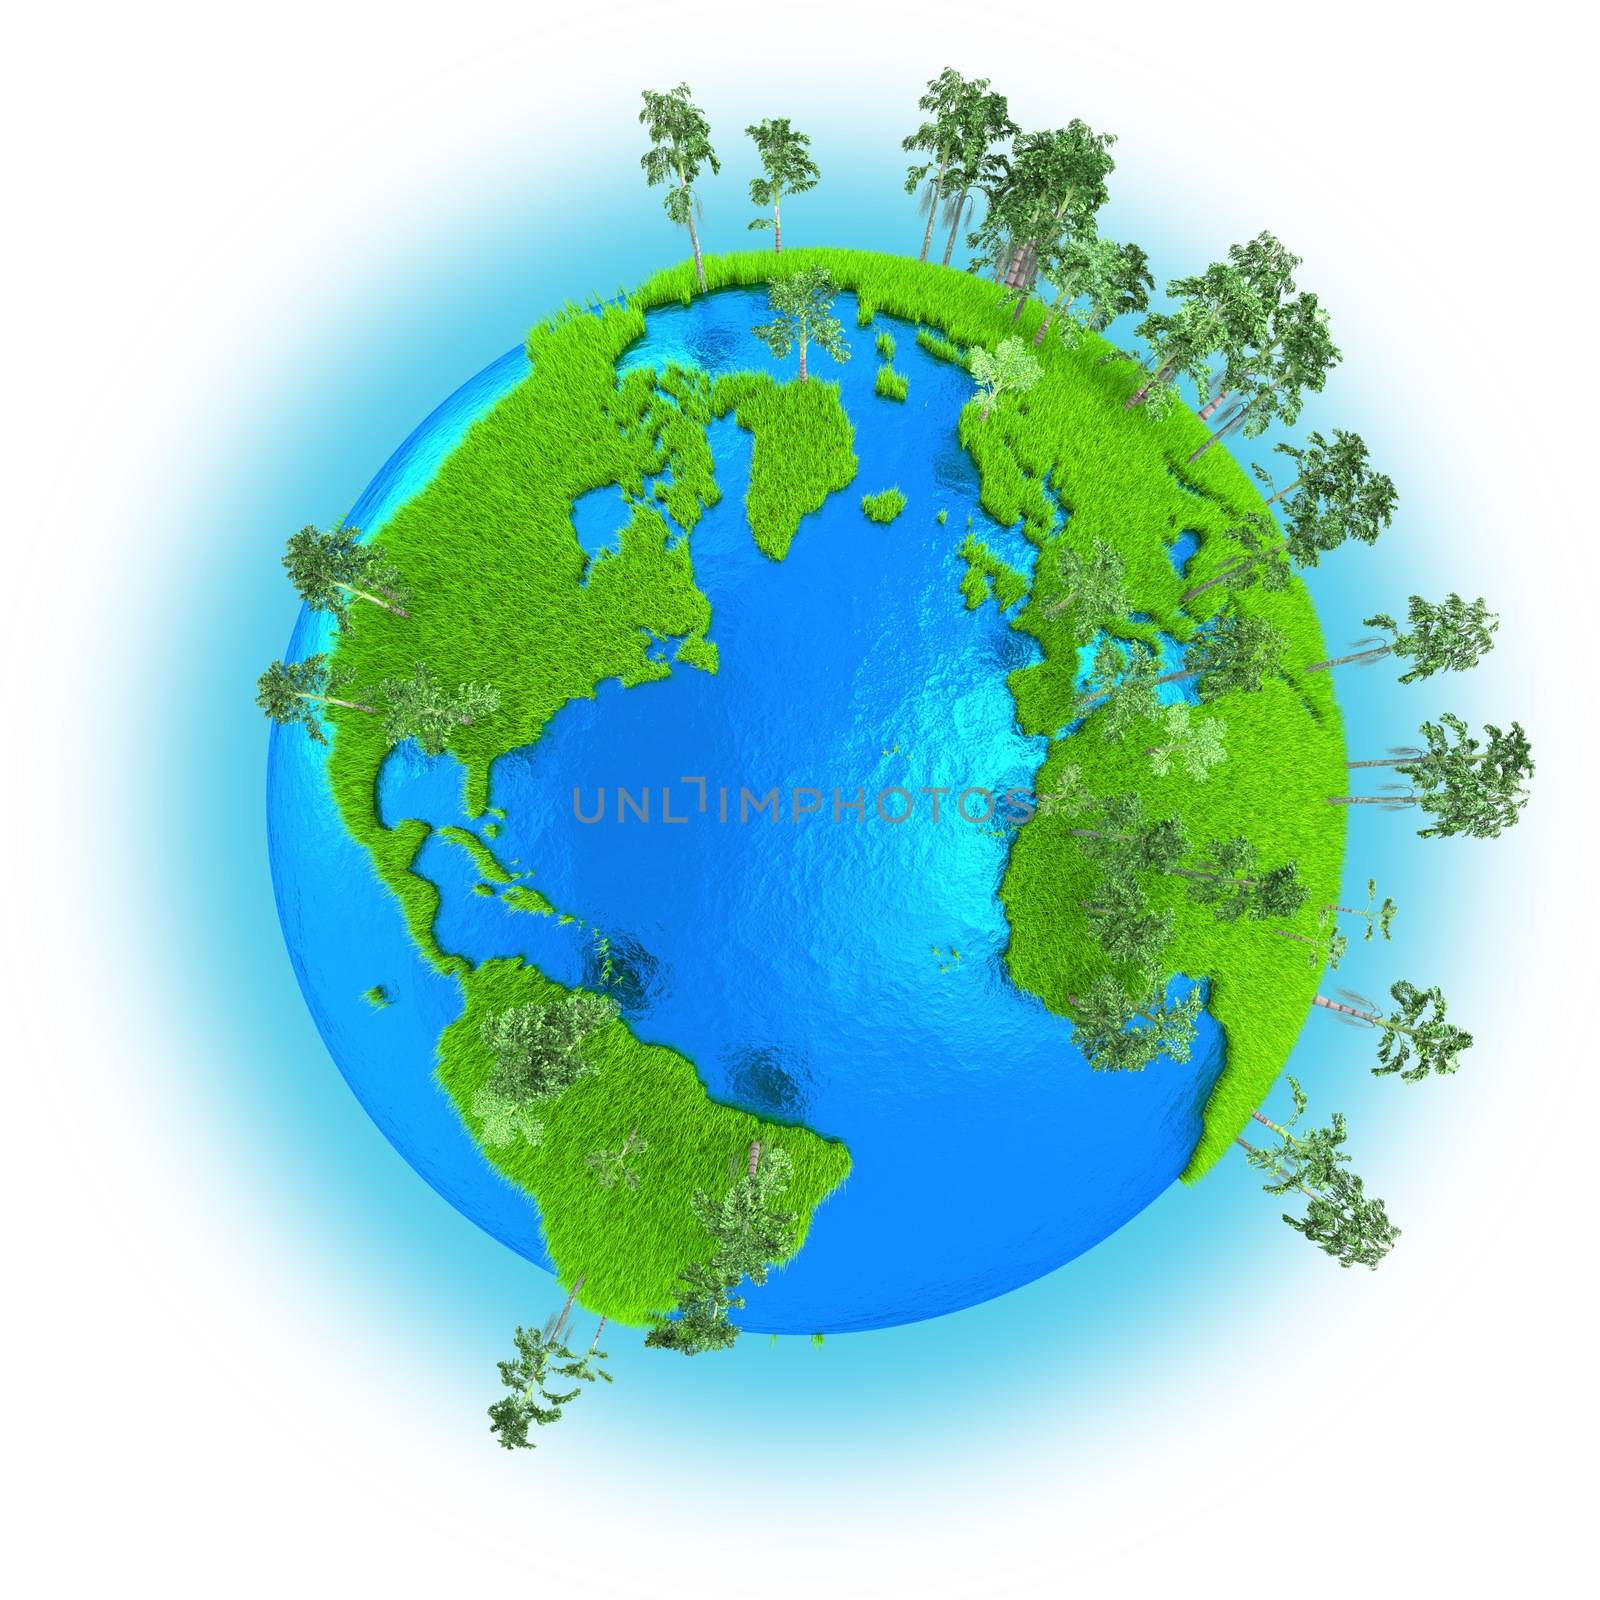 Americas, Europe and Africa on grassy planet Earth with trees isolated on white background